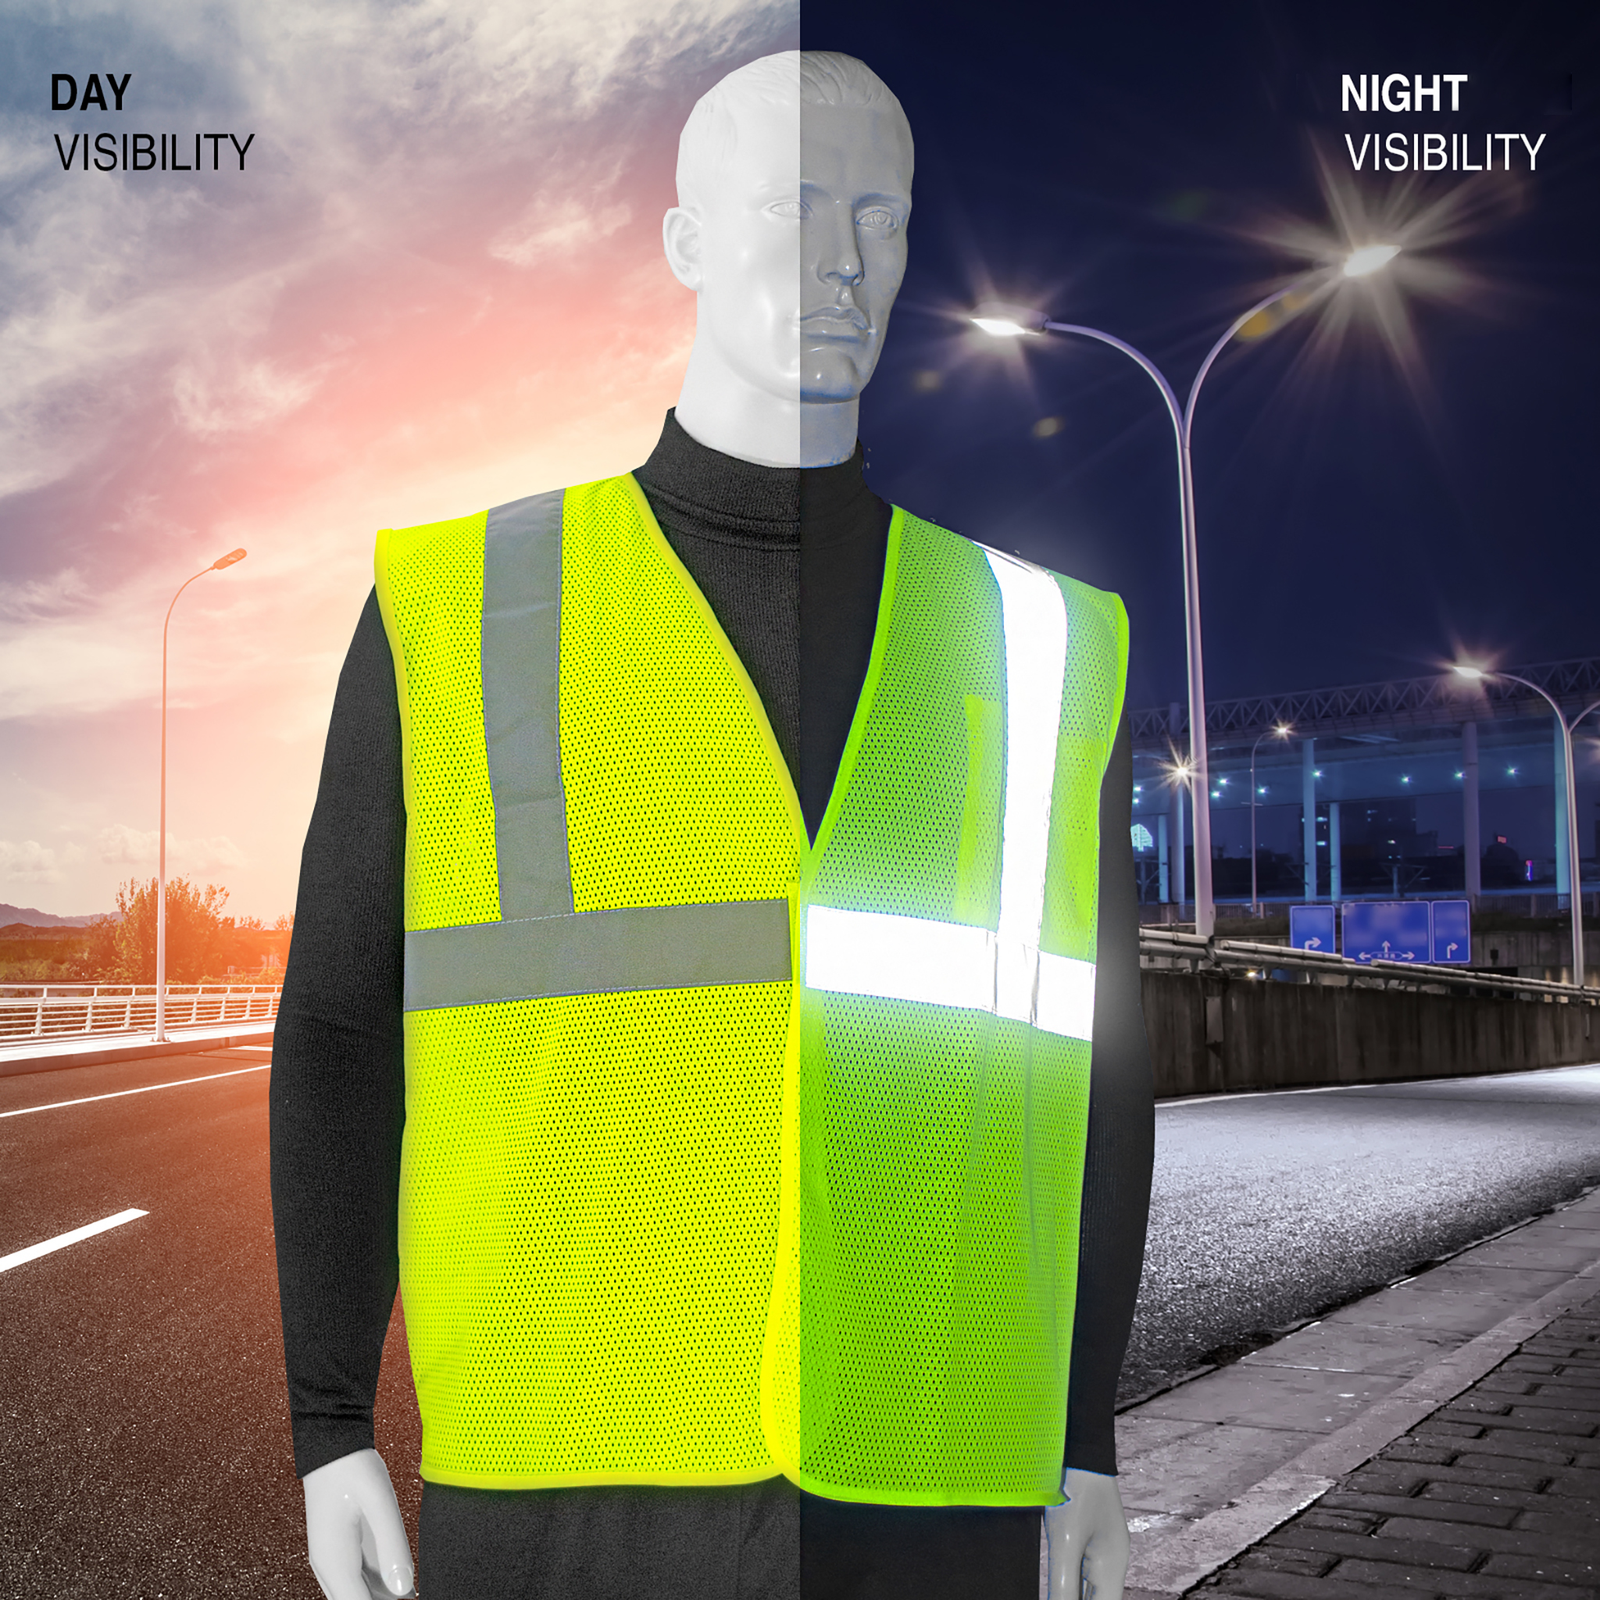 Mannequin wearing a lime Jorestech safety vest and it compares how bright it looks during day and night time